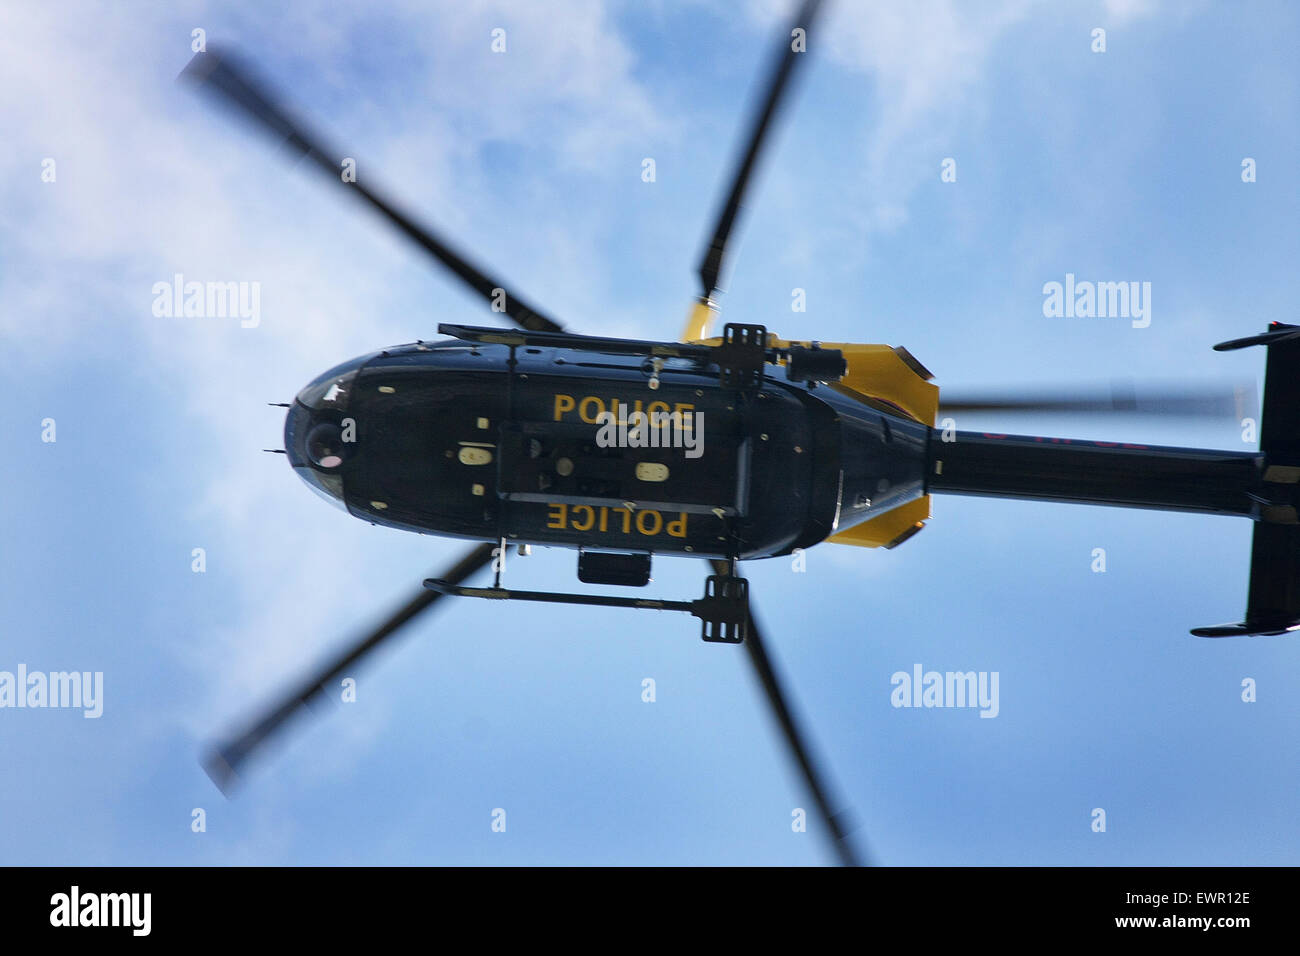 Police Helicopter in action. Stock Photo